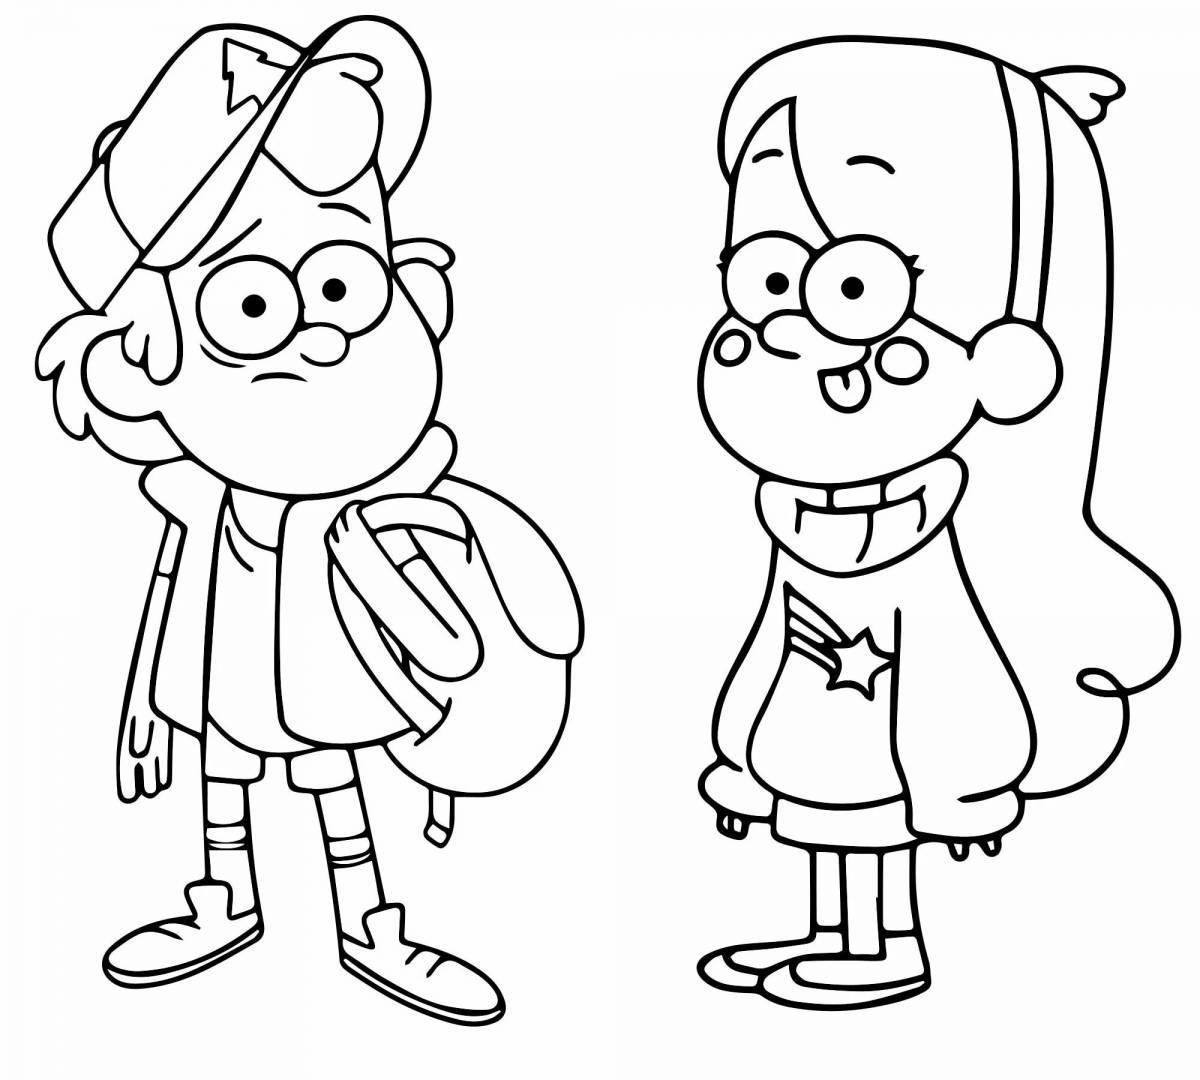 Gravity falls dipper dynamic coloring page